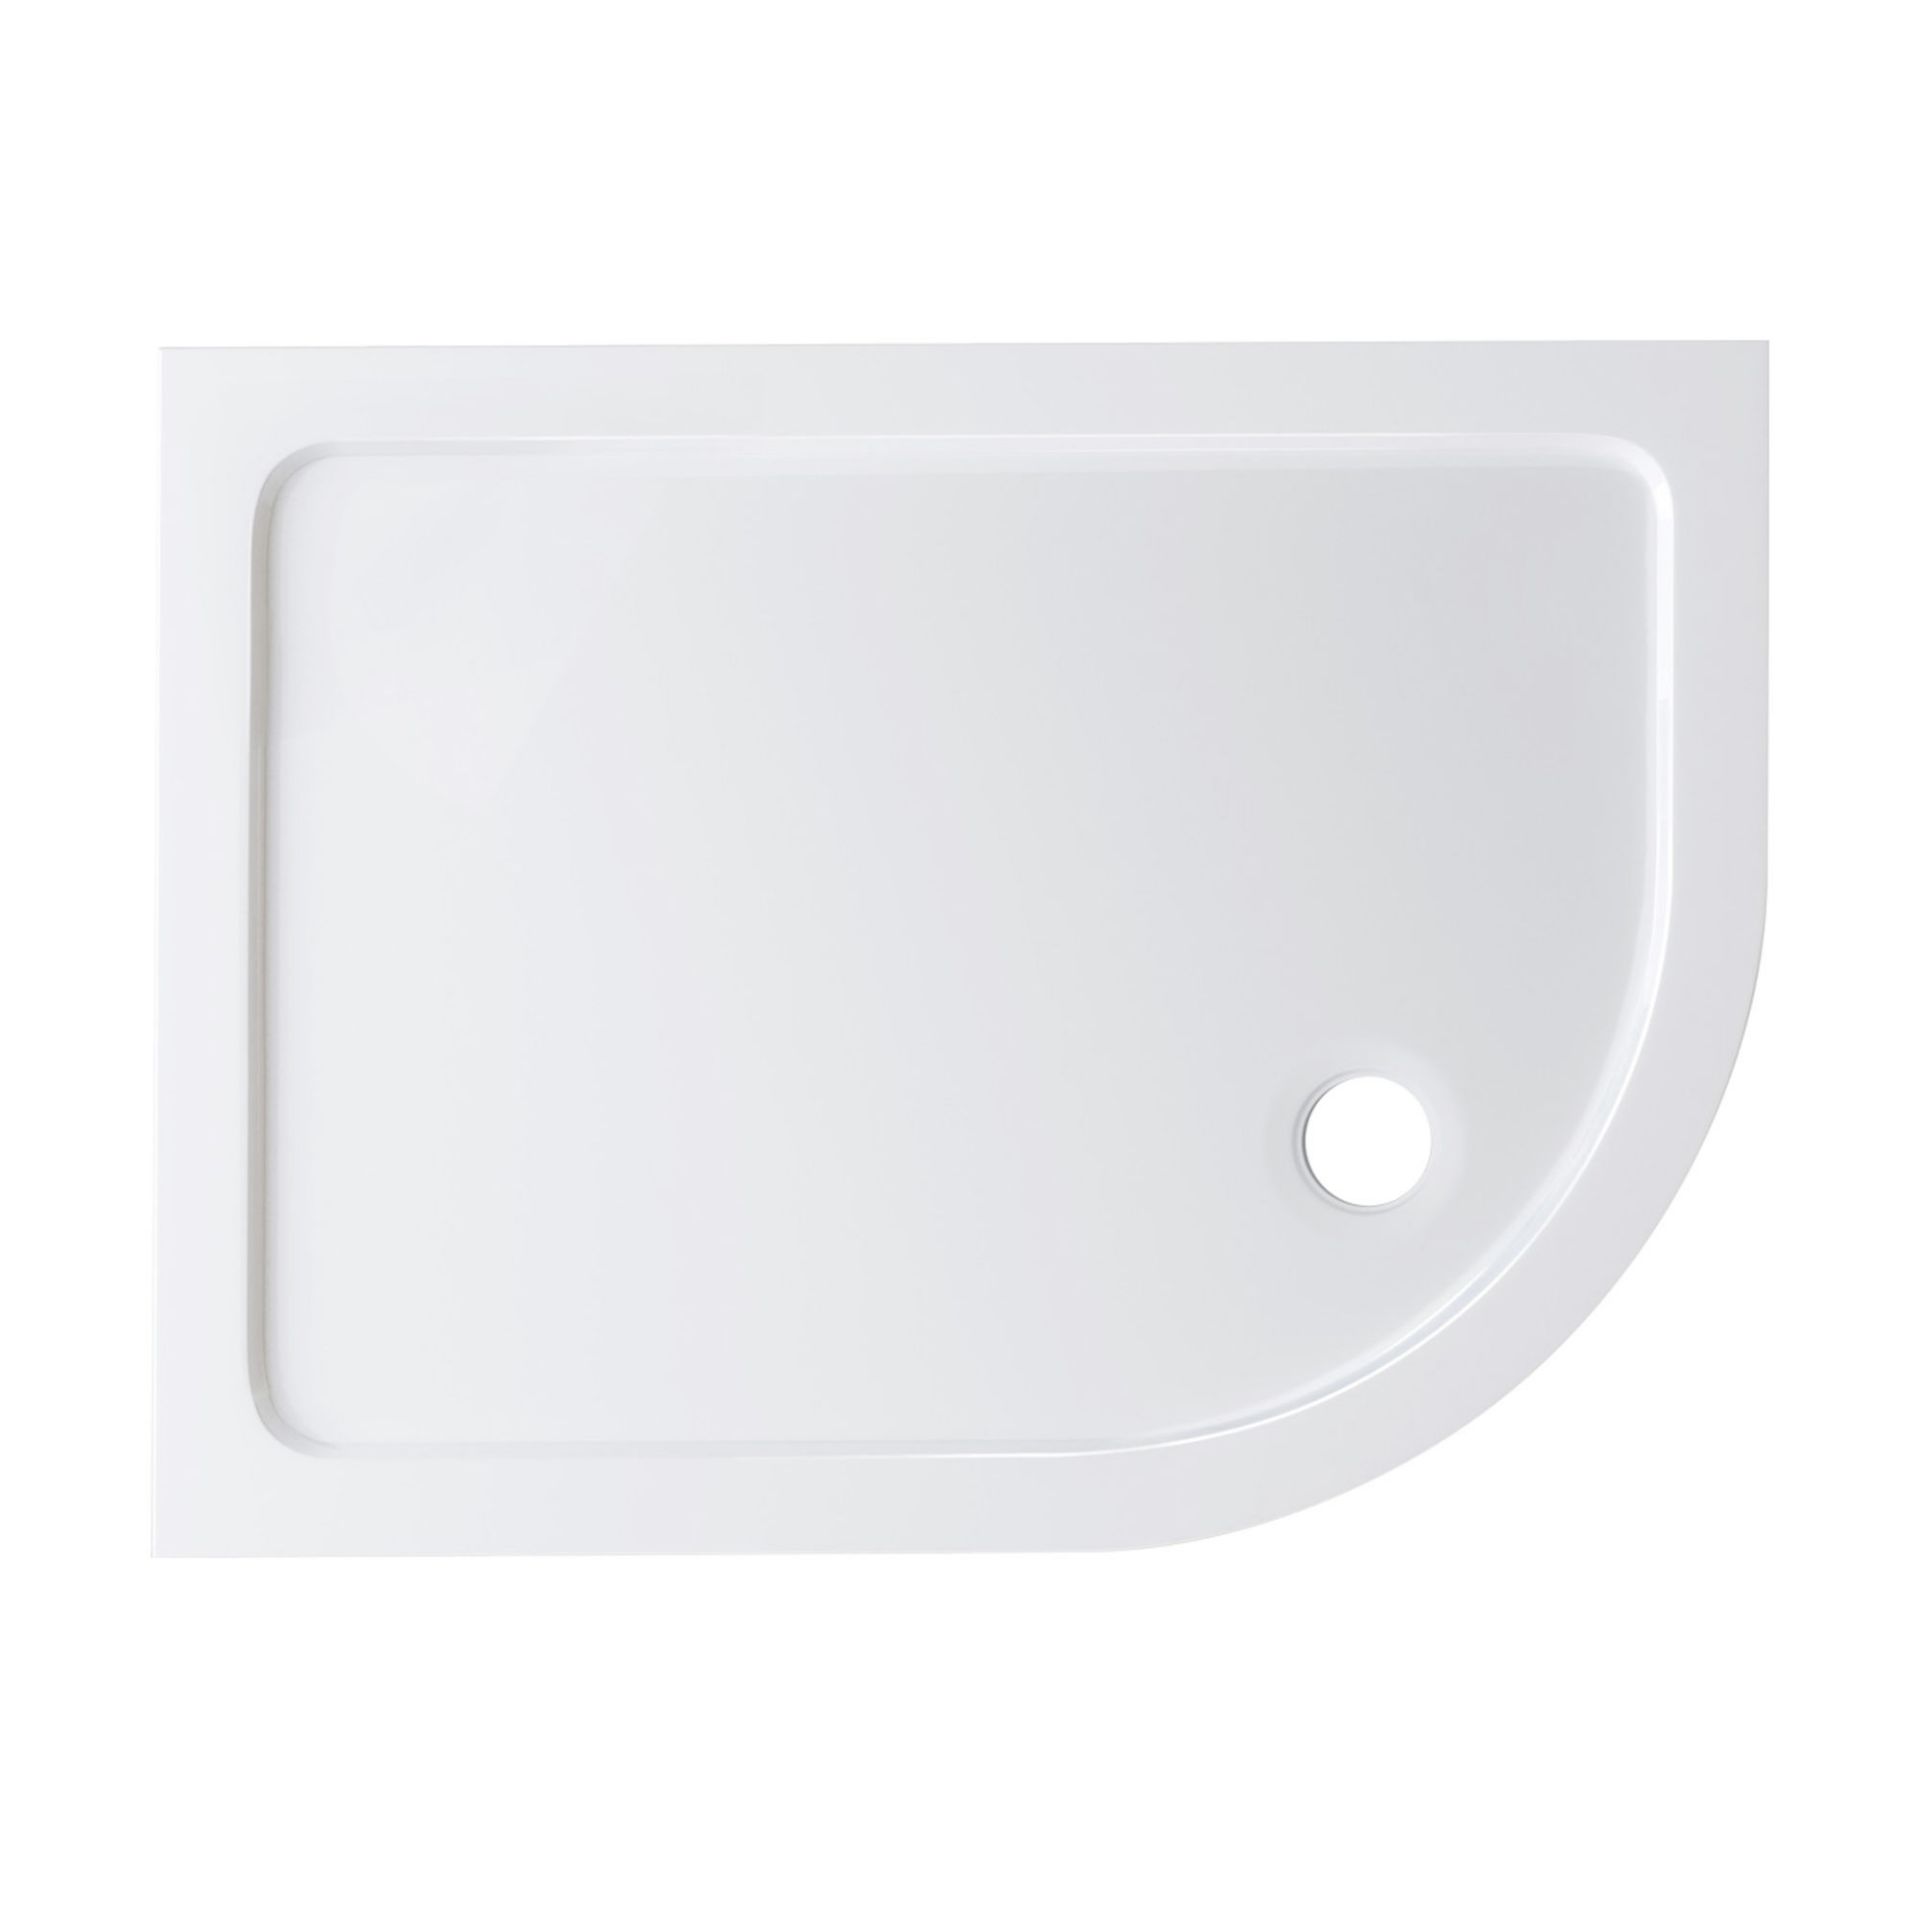 (AD54) 1200x900mm Offset Quadrant Ultra Slim Stone Shower Tray - Right. RRP £234.99. Low profile